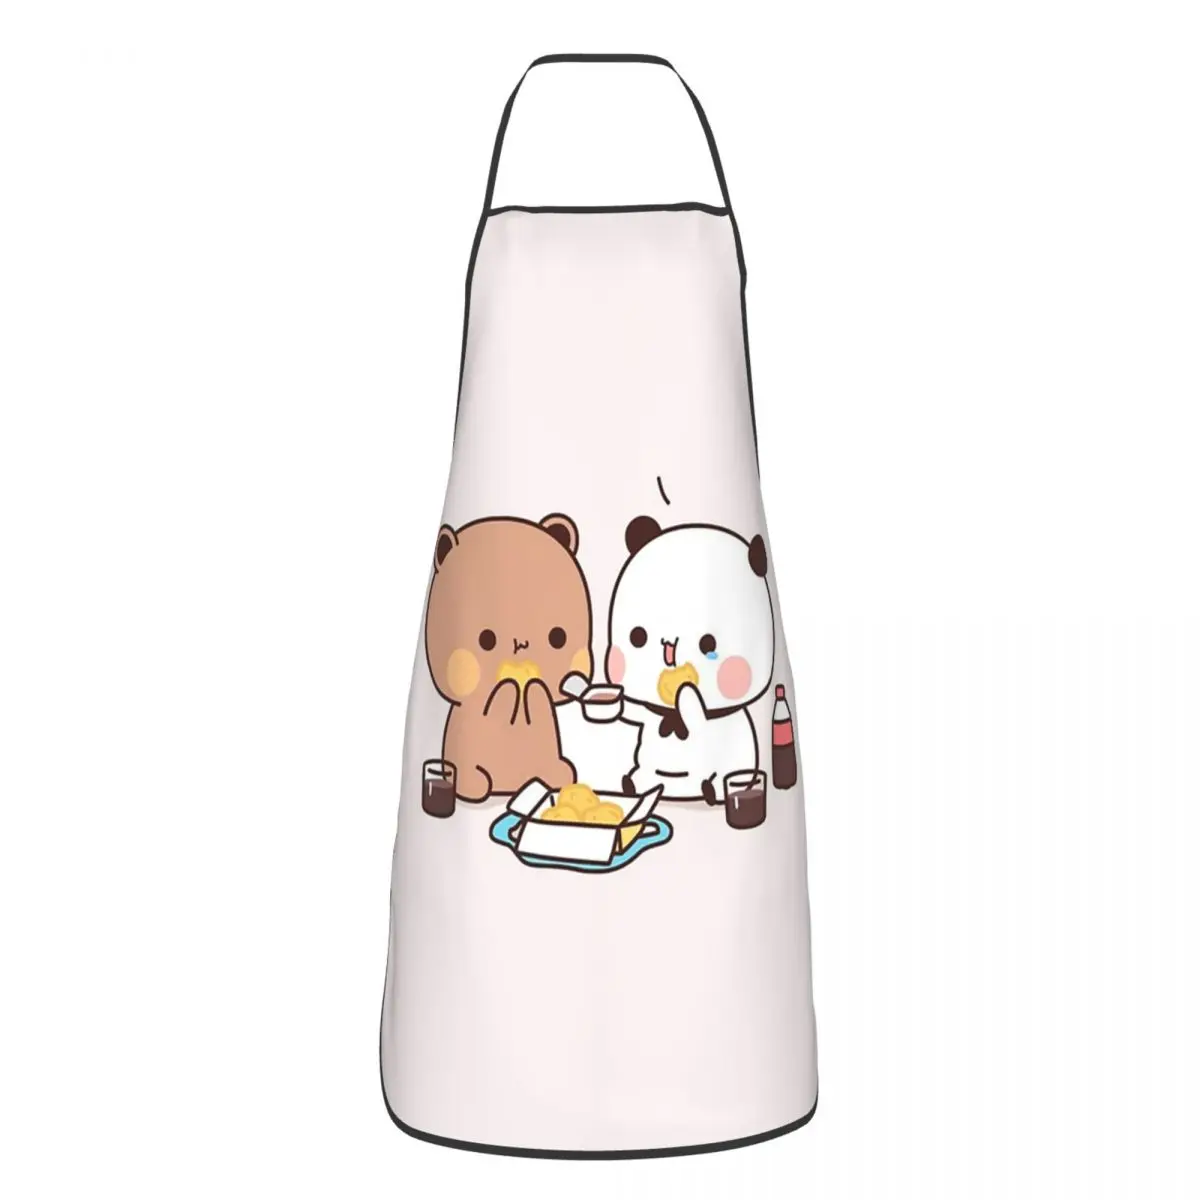 

Cute Cartoon Bears Aprons for Women Men Kitchen Chef Cooking Tablier Home Bib Baking Cleaning Unisex Adult Pinafore Delantal